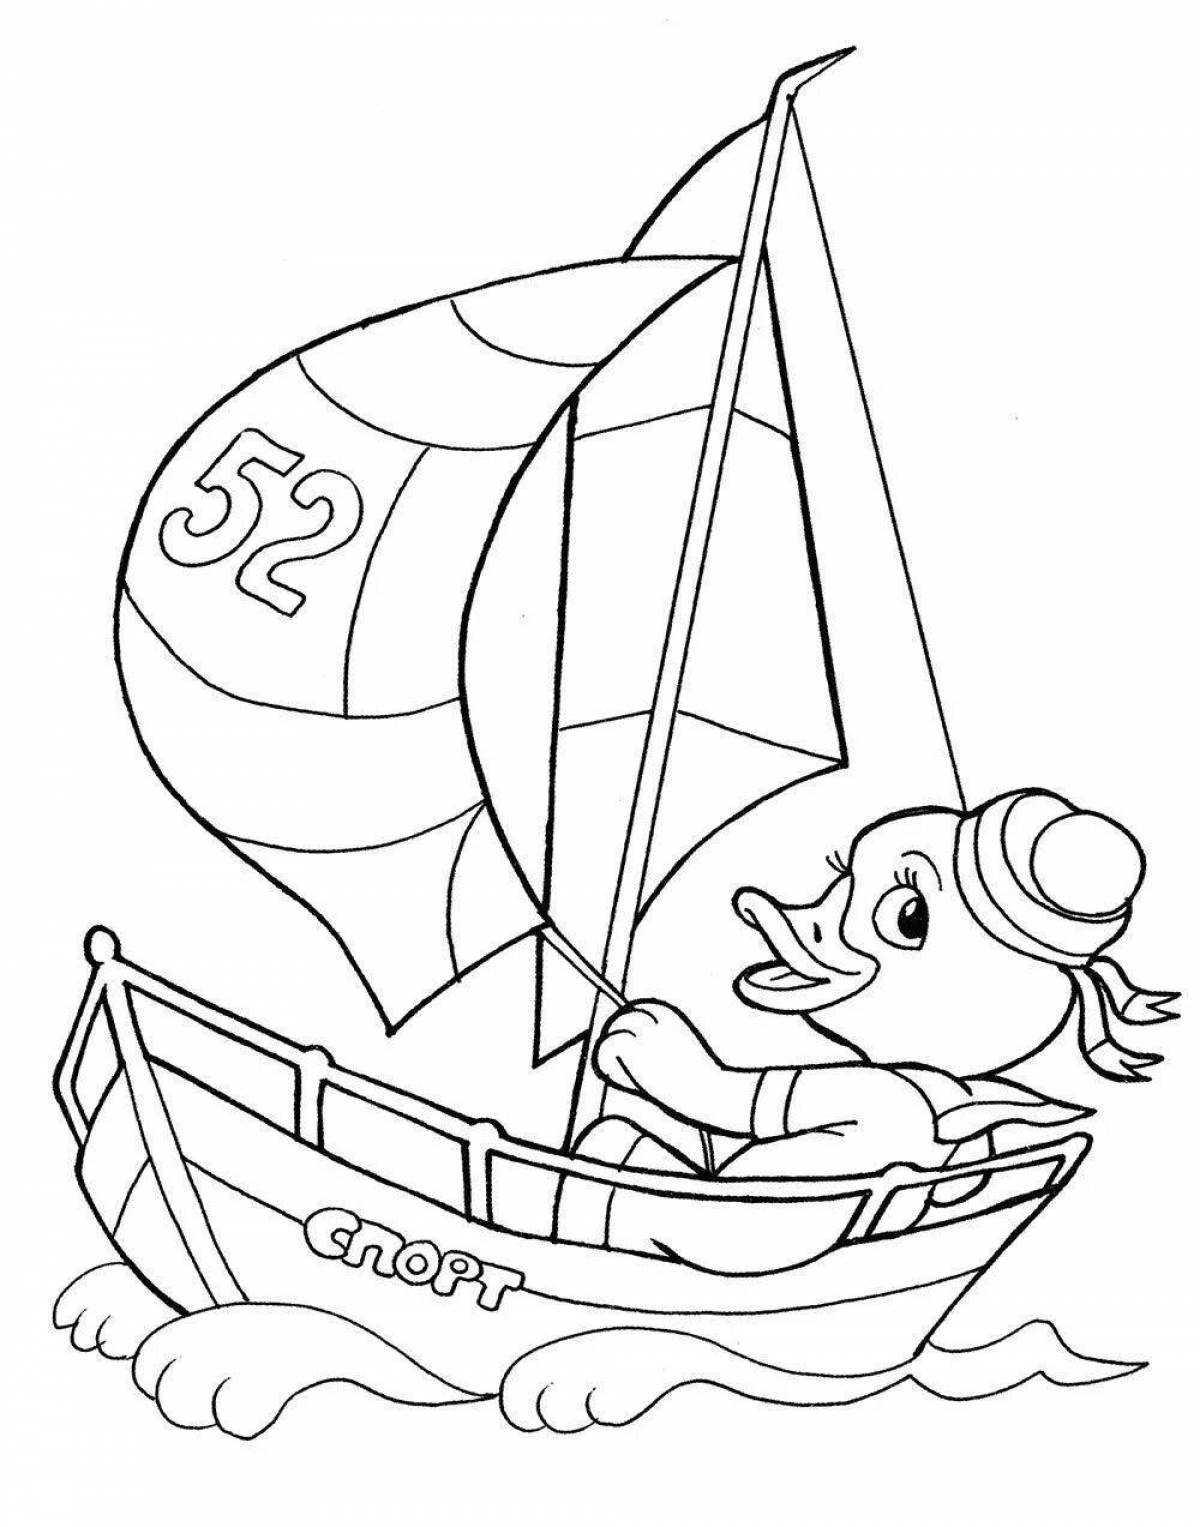 Exciting coloring pages for 5 year olds